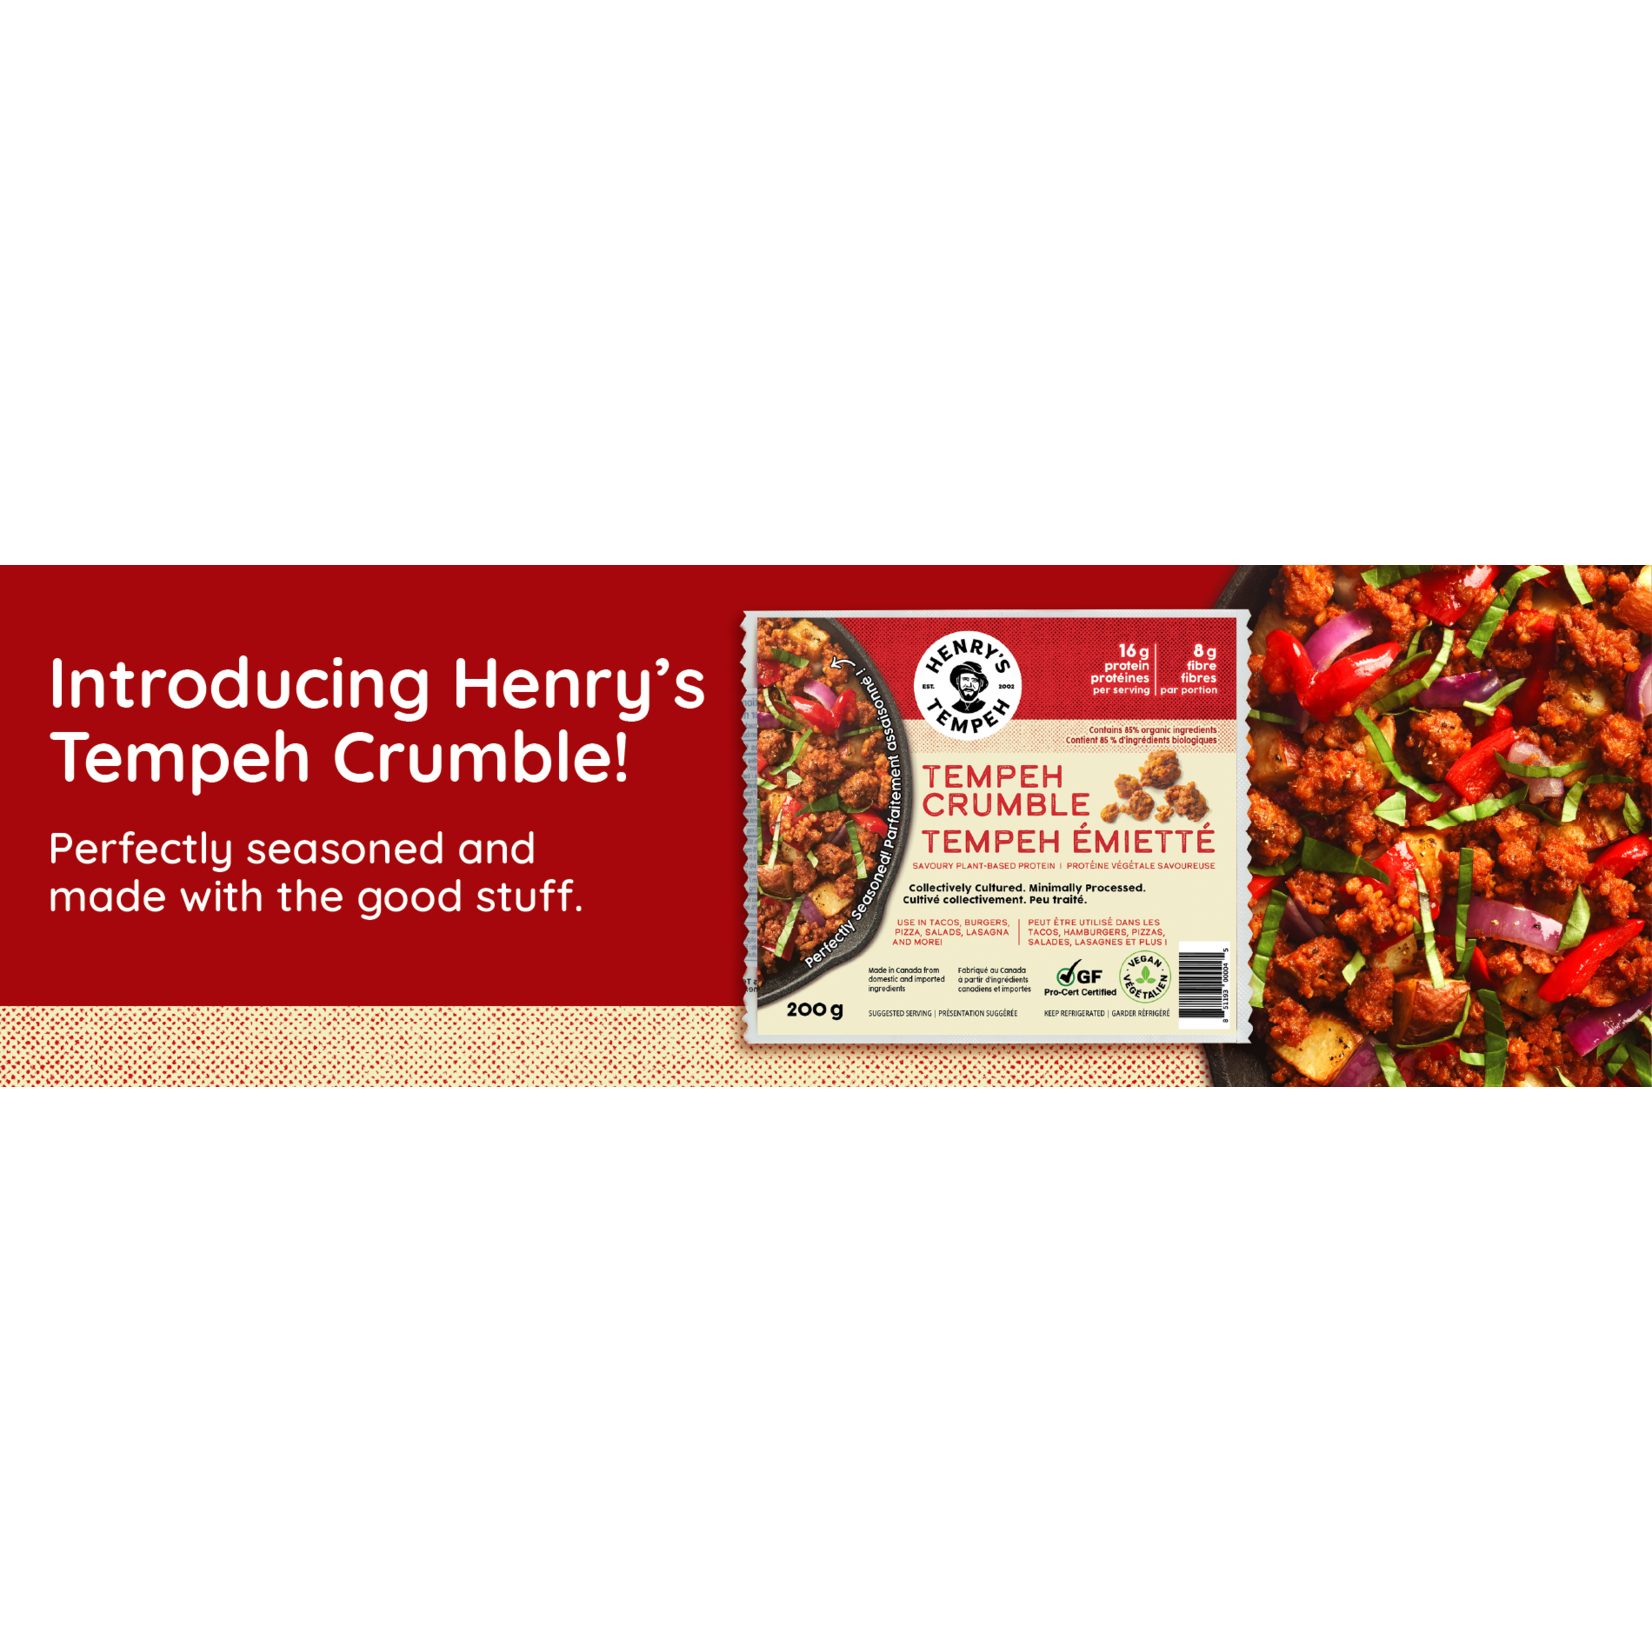 HENRY'S HENRY'S TEMPEH CRUMBLE